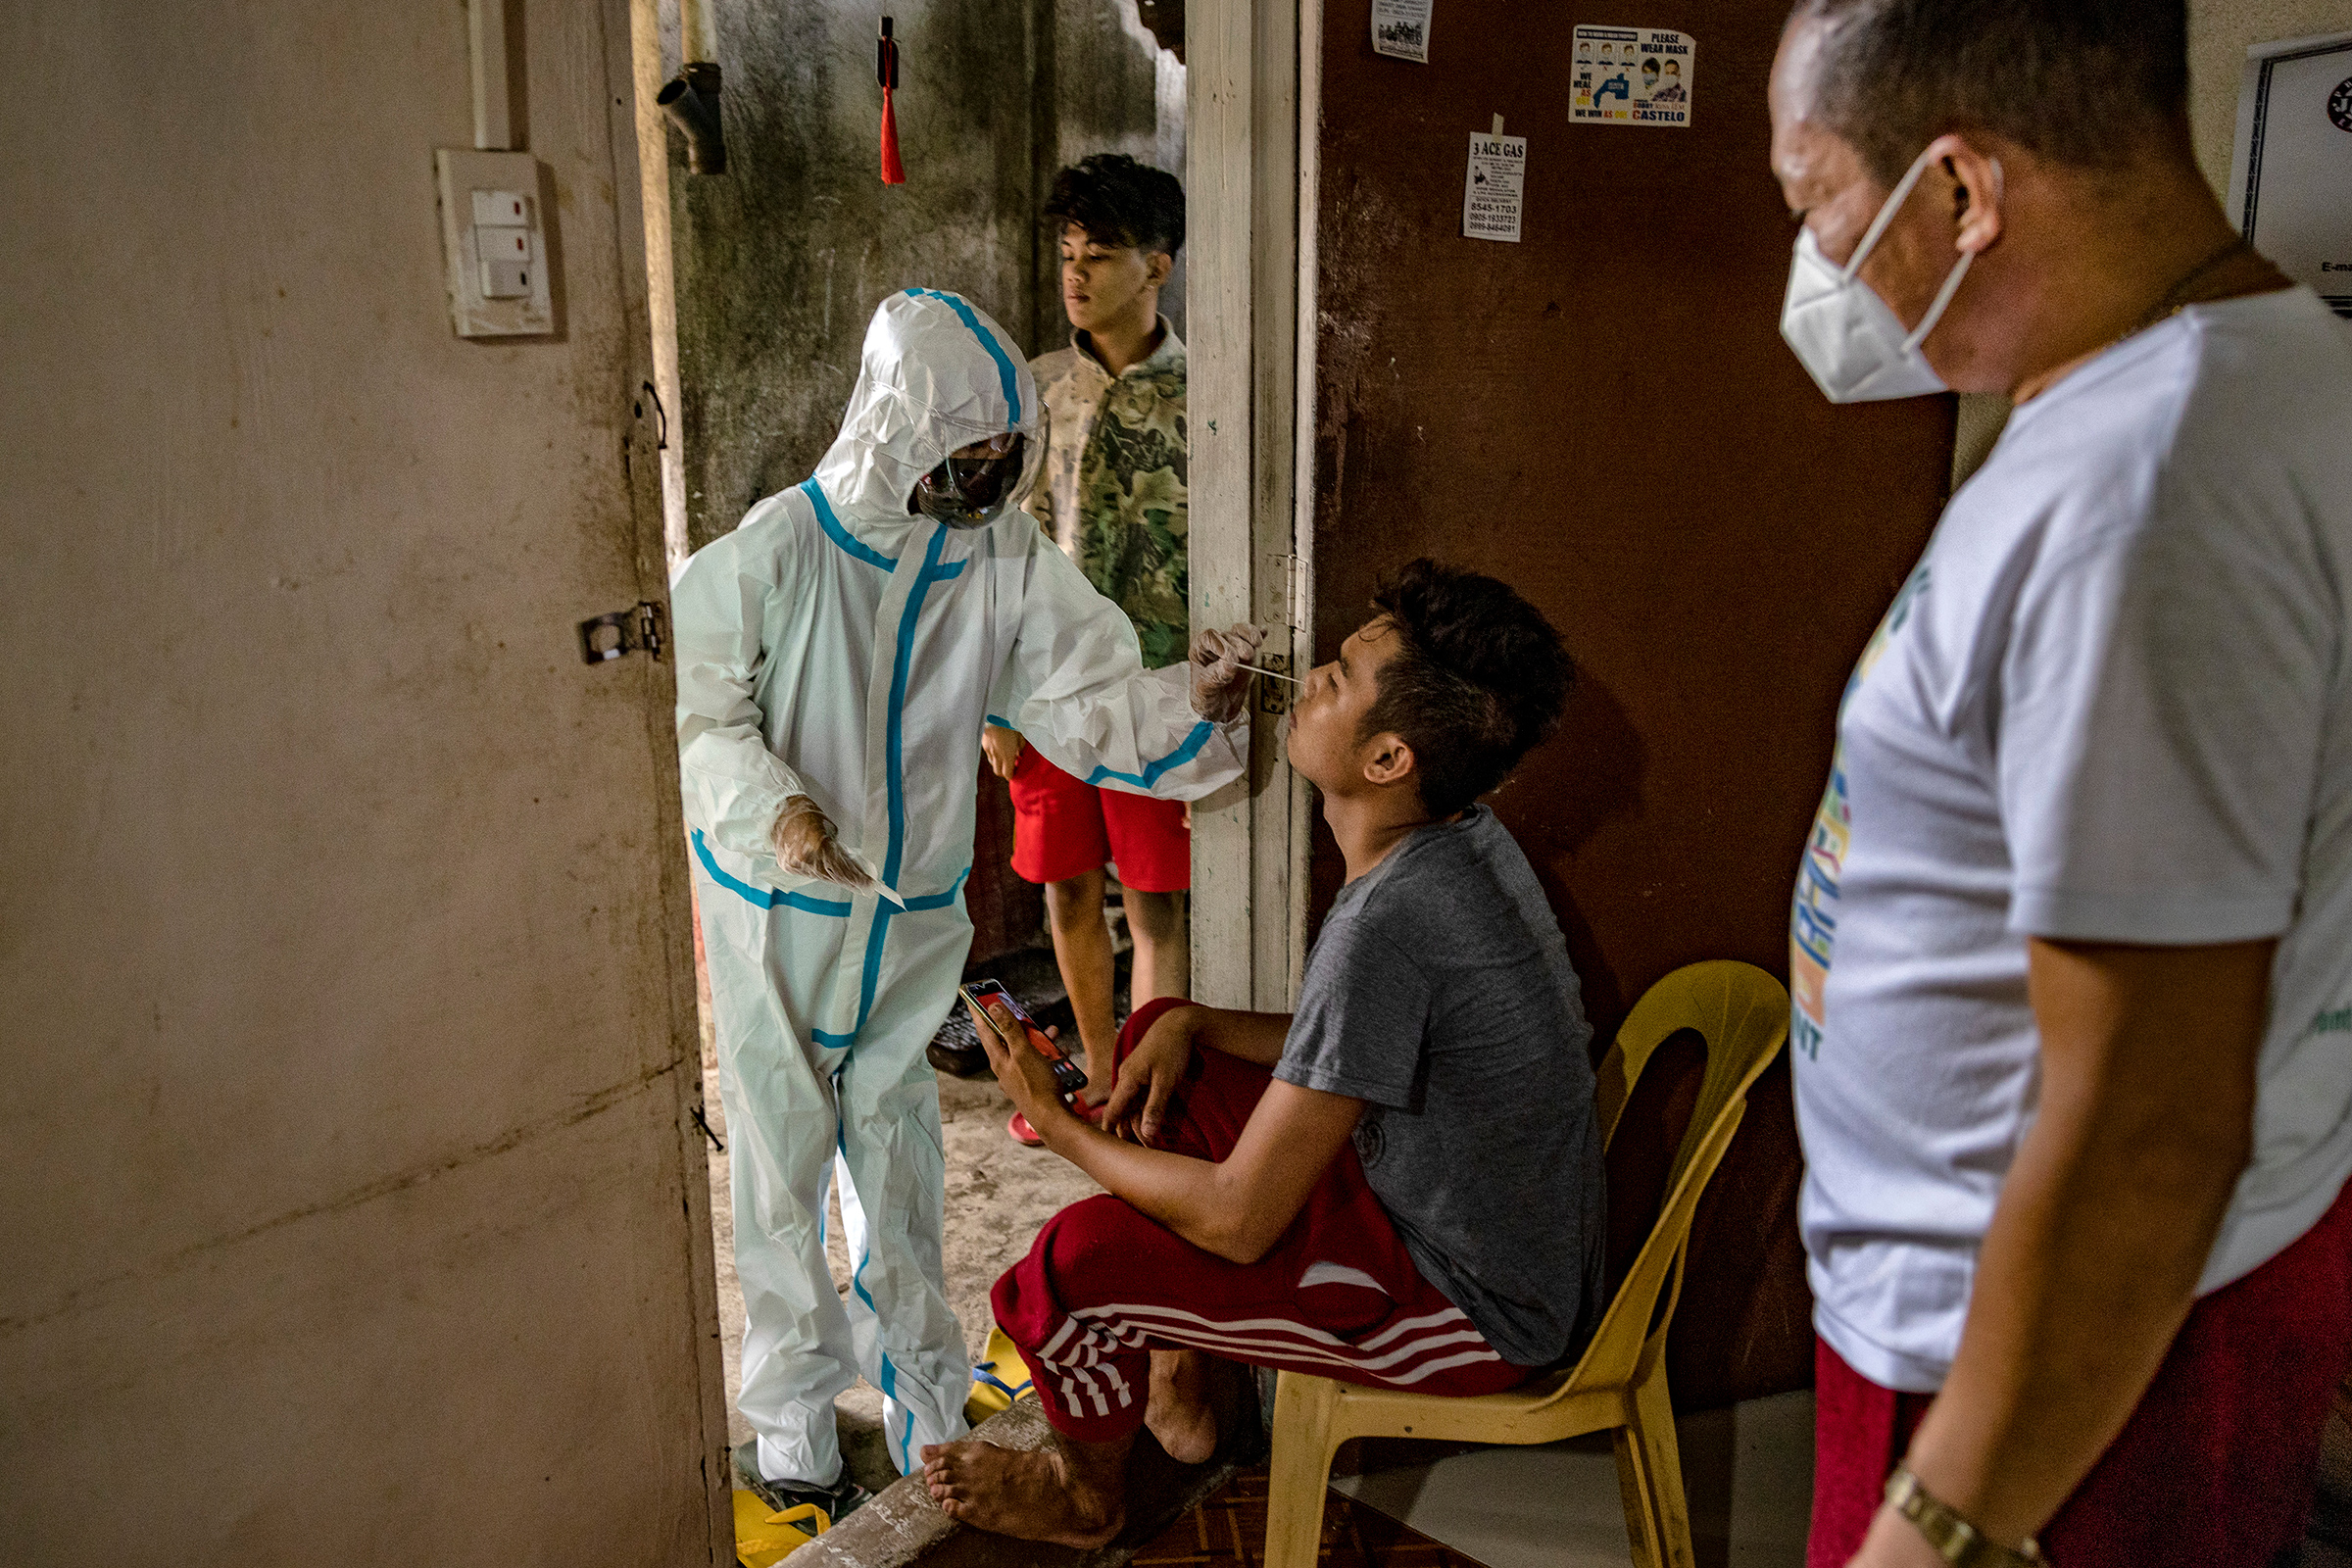 Katrina Pelotin, a field nurse from the City Epidemiology and Surveillance Unit, conducts a swab test on a family member of a COVID-19 patient isolating at home as part of contact tracing efforts in Quezon City, Metro Manila, on April 15. (Ezra Acayan—Getty Images)